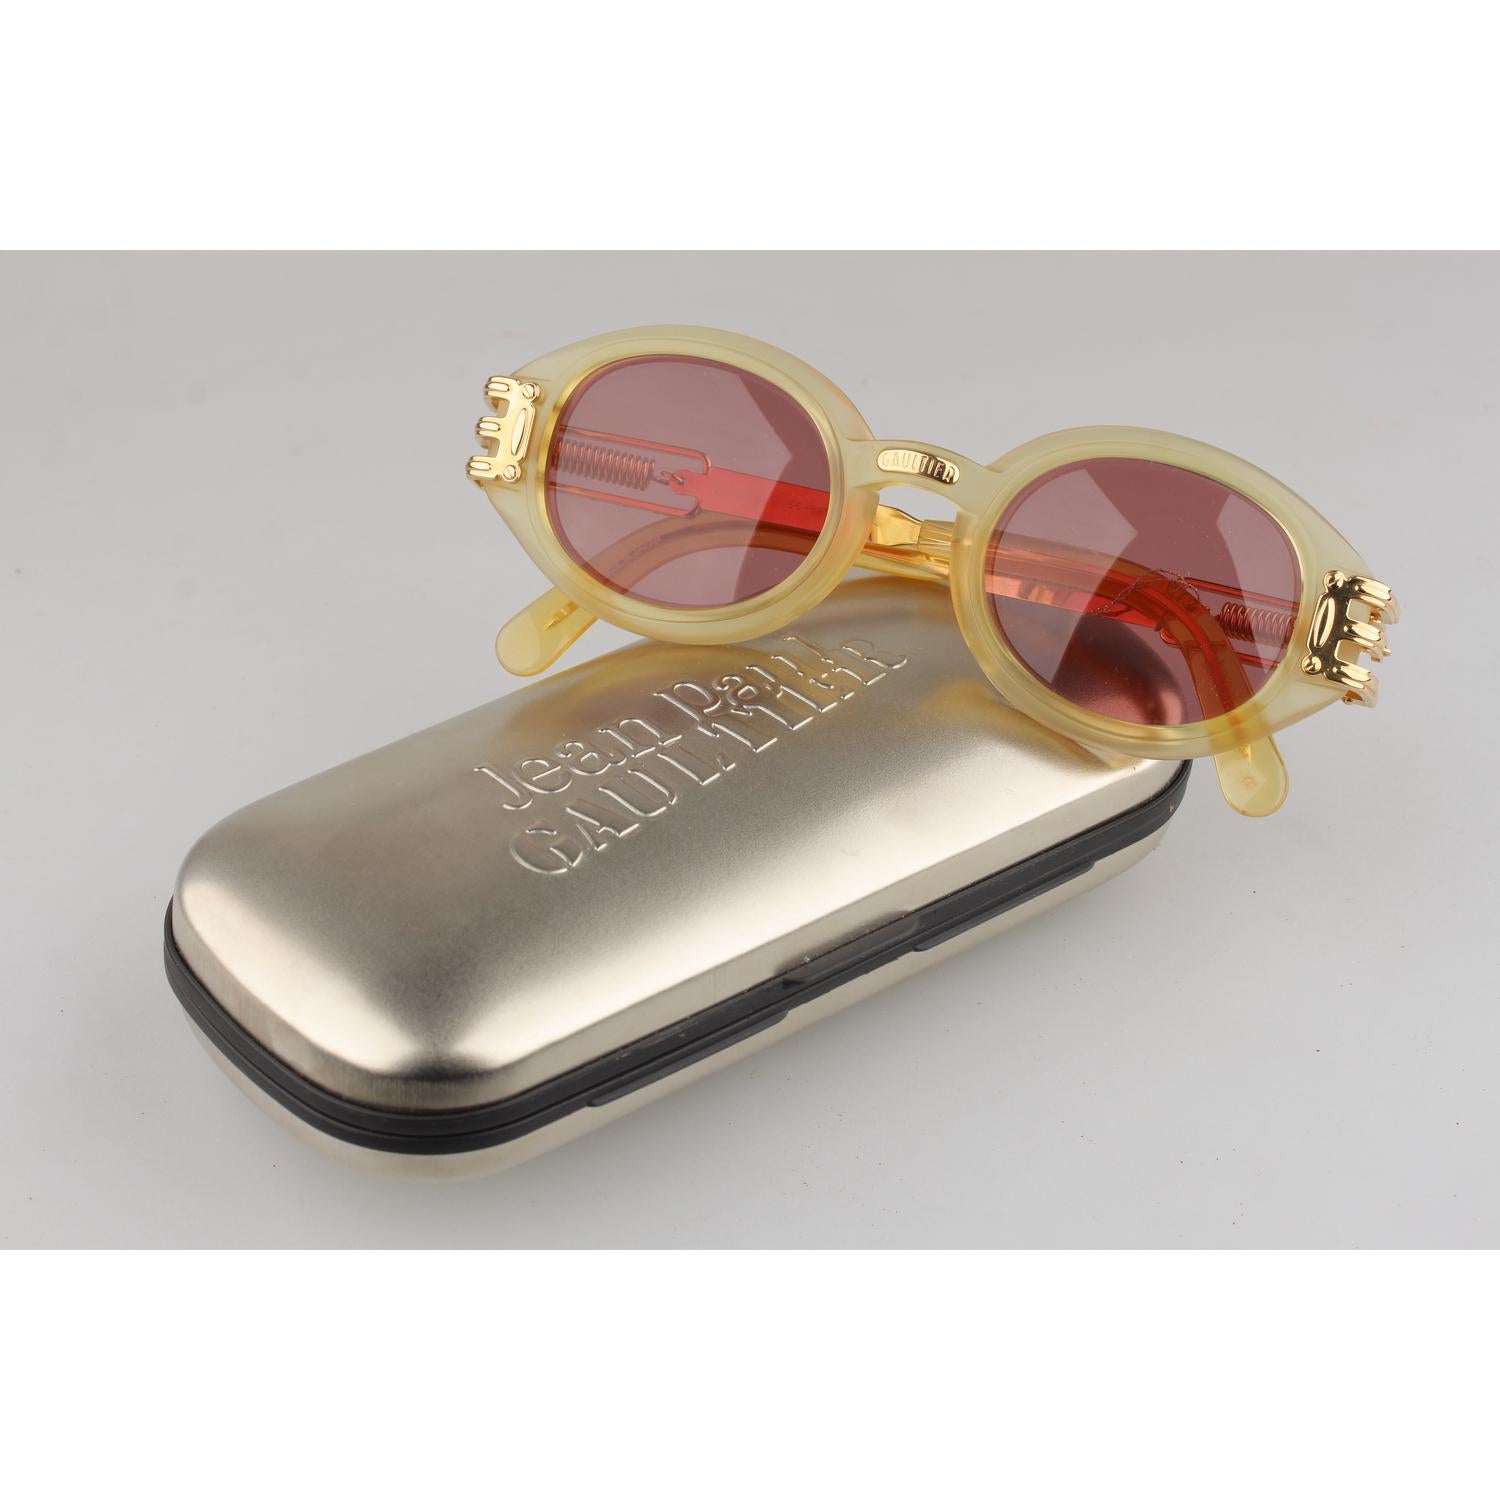 Original Vintage 1990s Jean Paul Gaultier Unisex Sunglasses. Gold frame with honey tone front part. Gold metal arms, with JPG famous gold metal springs on both sides. Paper shop tag still attached. Model and references: 56-5203 - 56/21